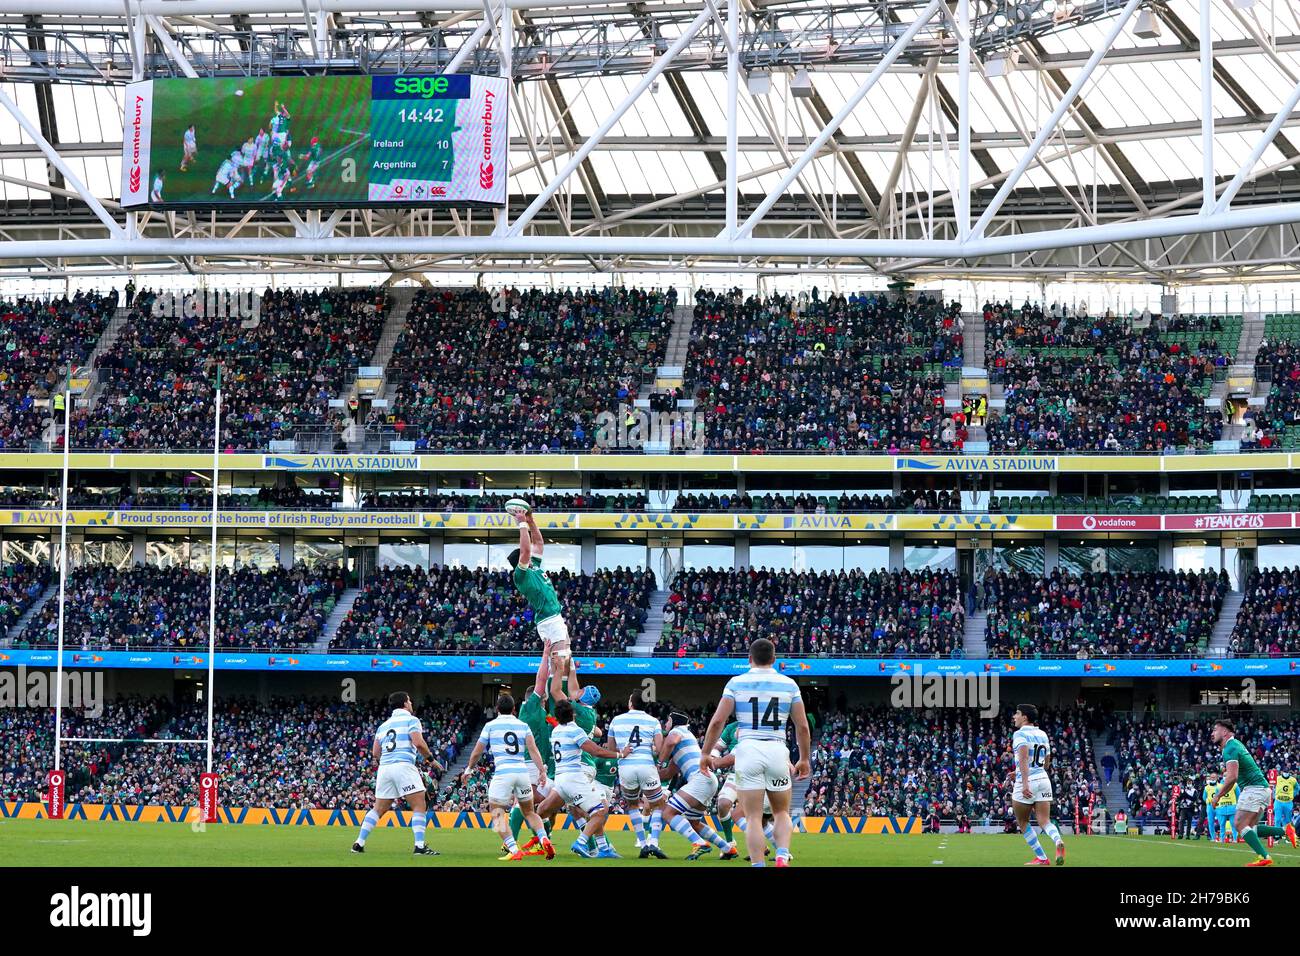 Ireland's James Ryan wins a line out during the Autumn International match at the Aviva Stadium in Dublin, Ireland. Picture date: Sunday November 21, 2021. Stock Photo